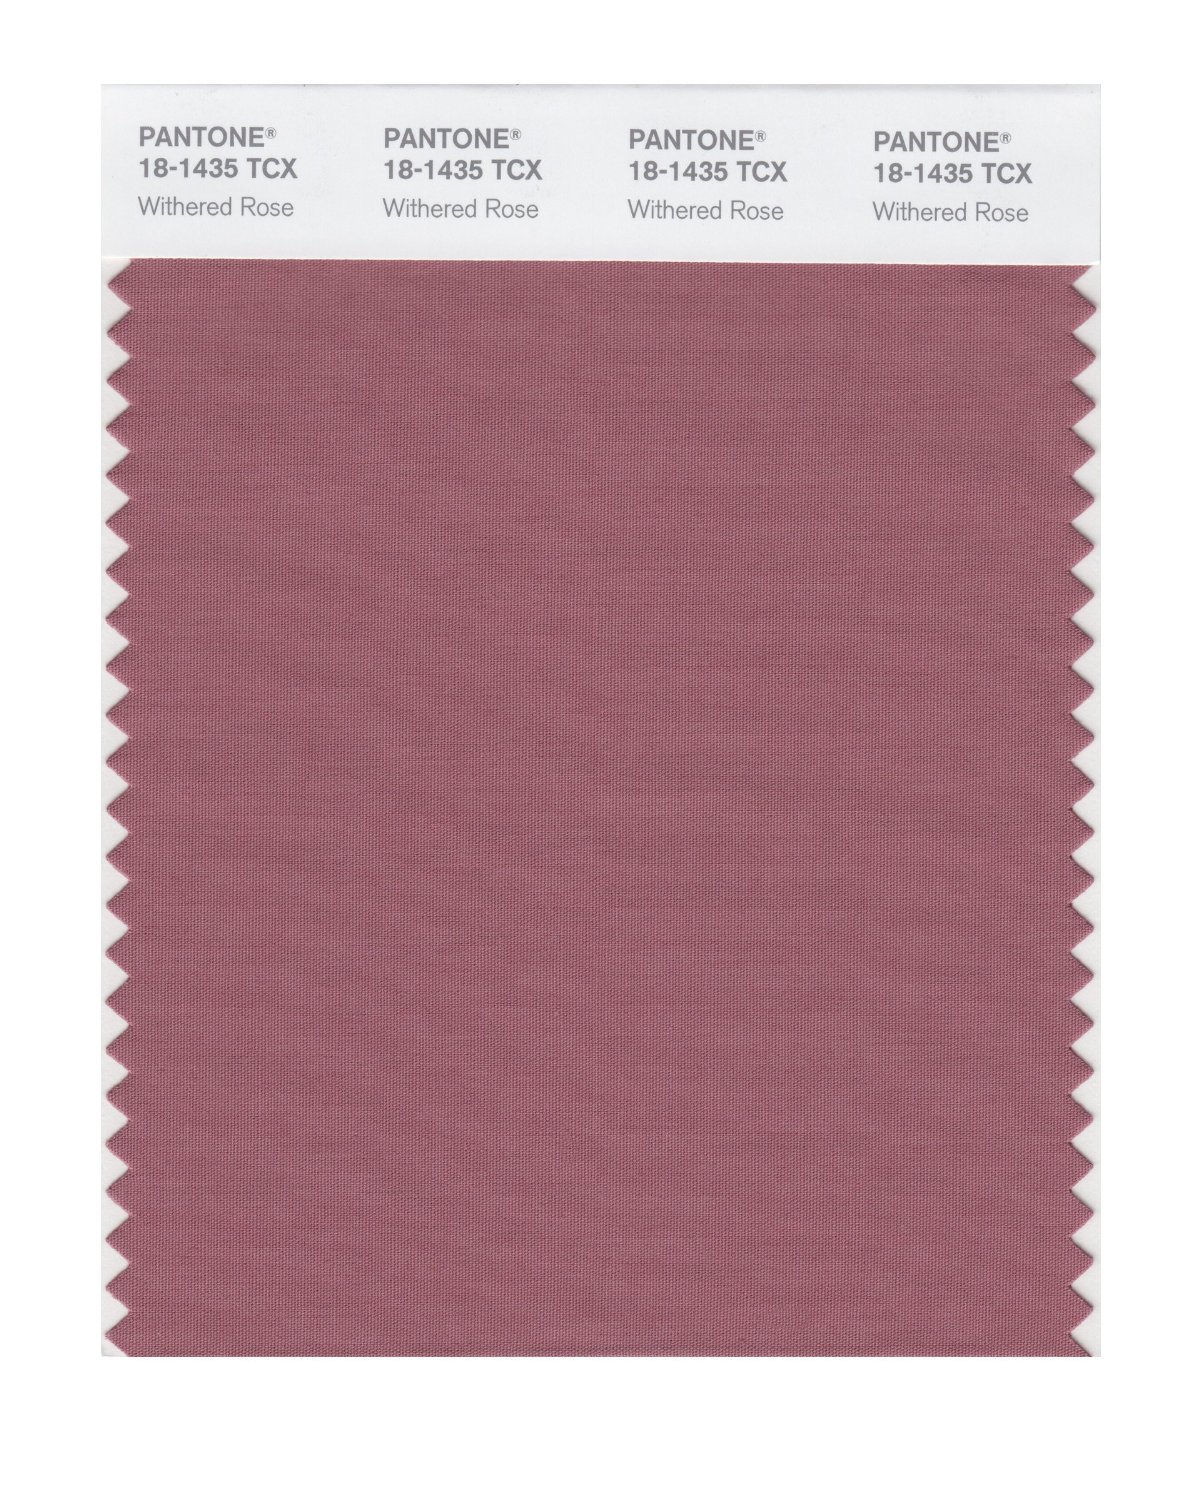 Pantone Cotton Swatch 18-1435 Withered Rose